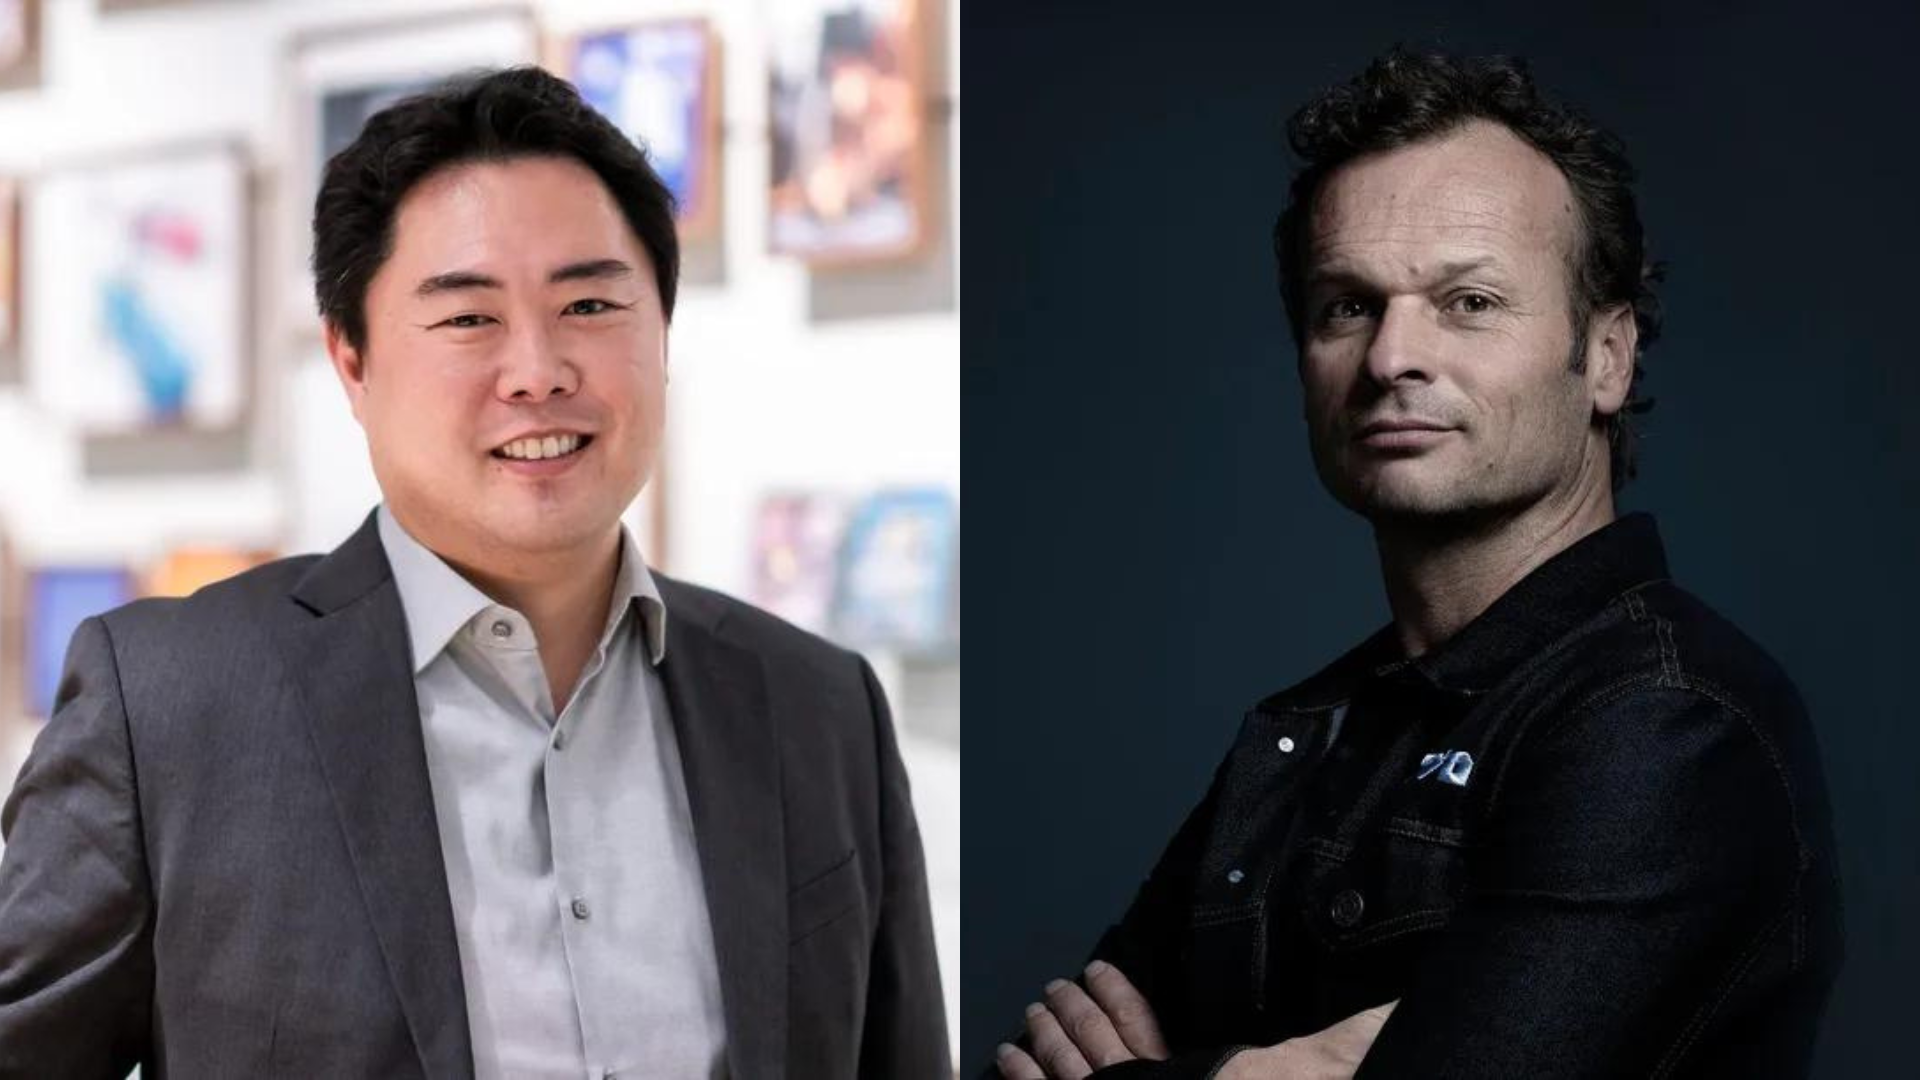 Sony Appoints New Co-CEOs to Lead PlayStation